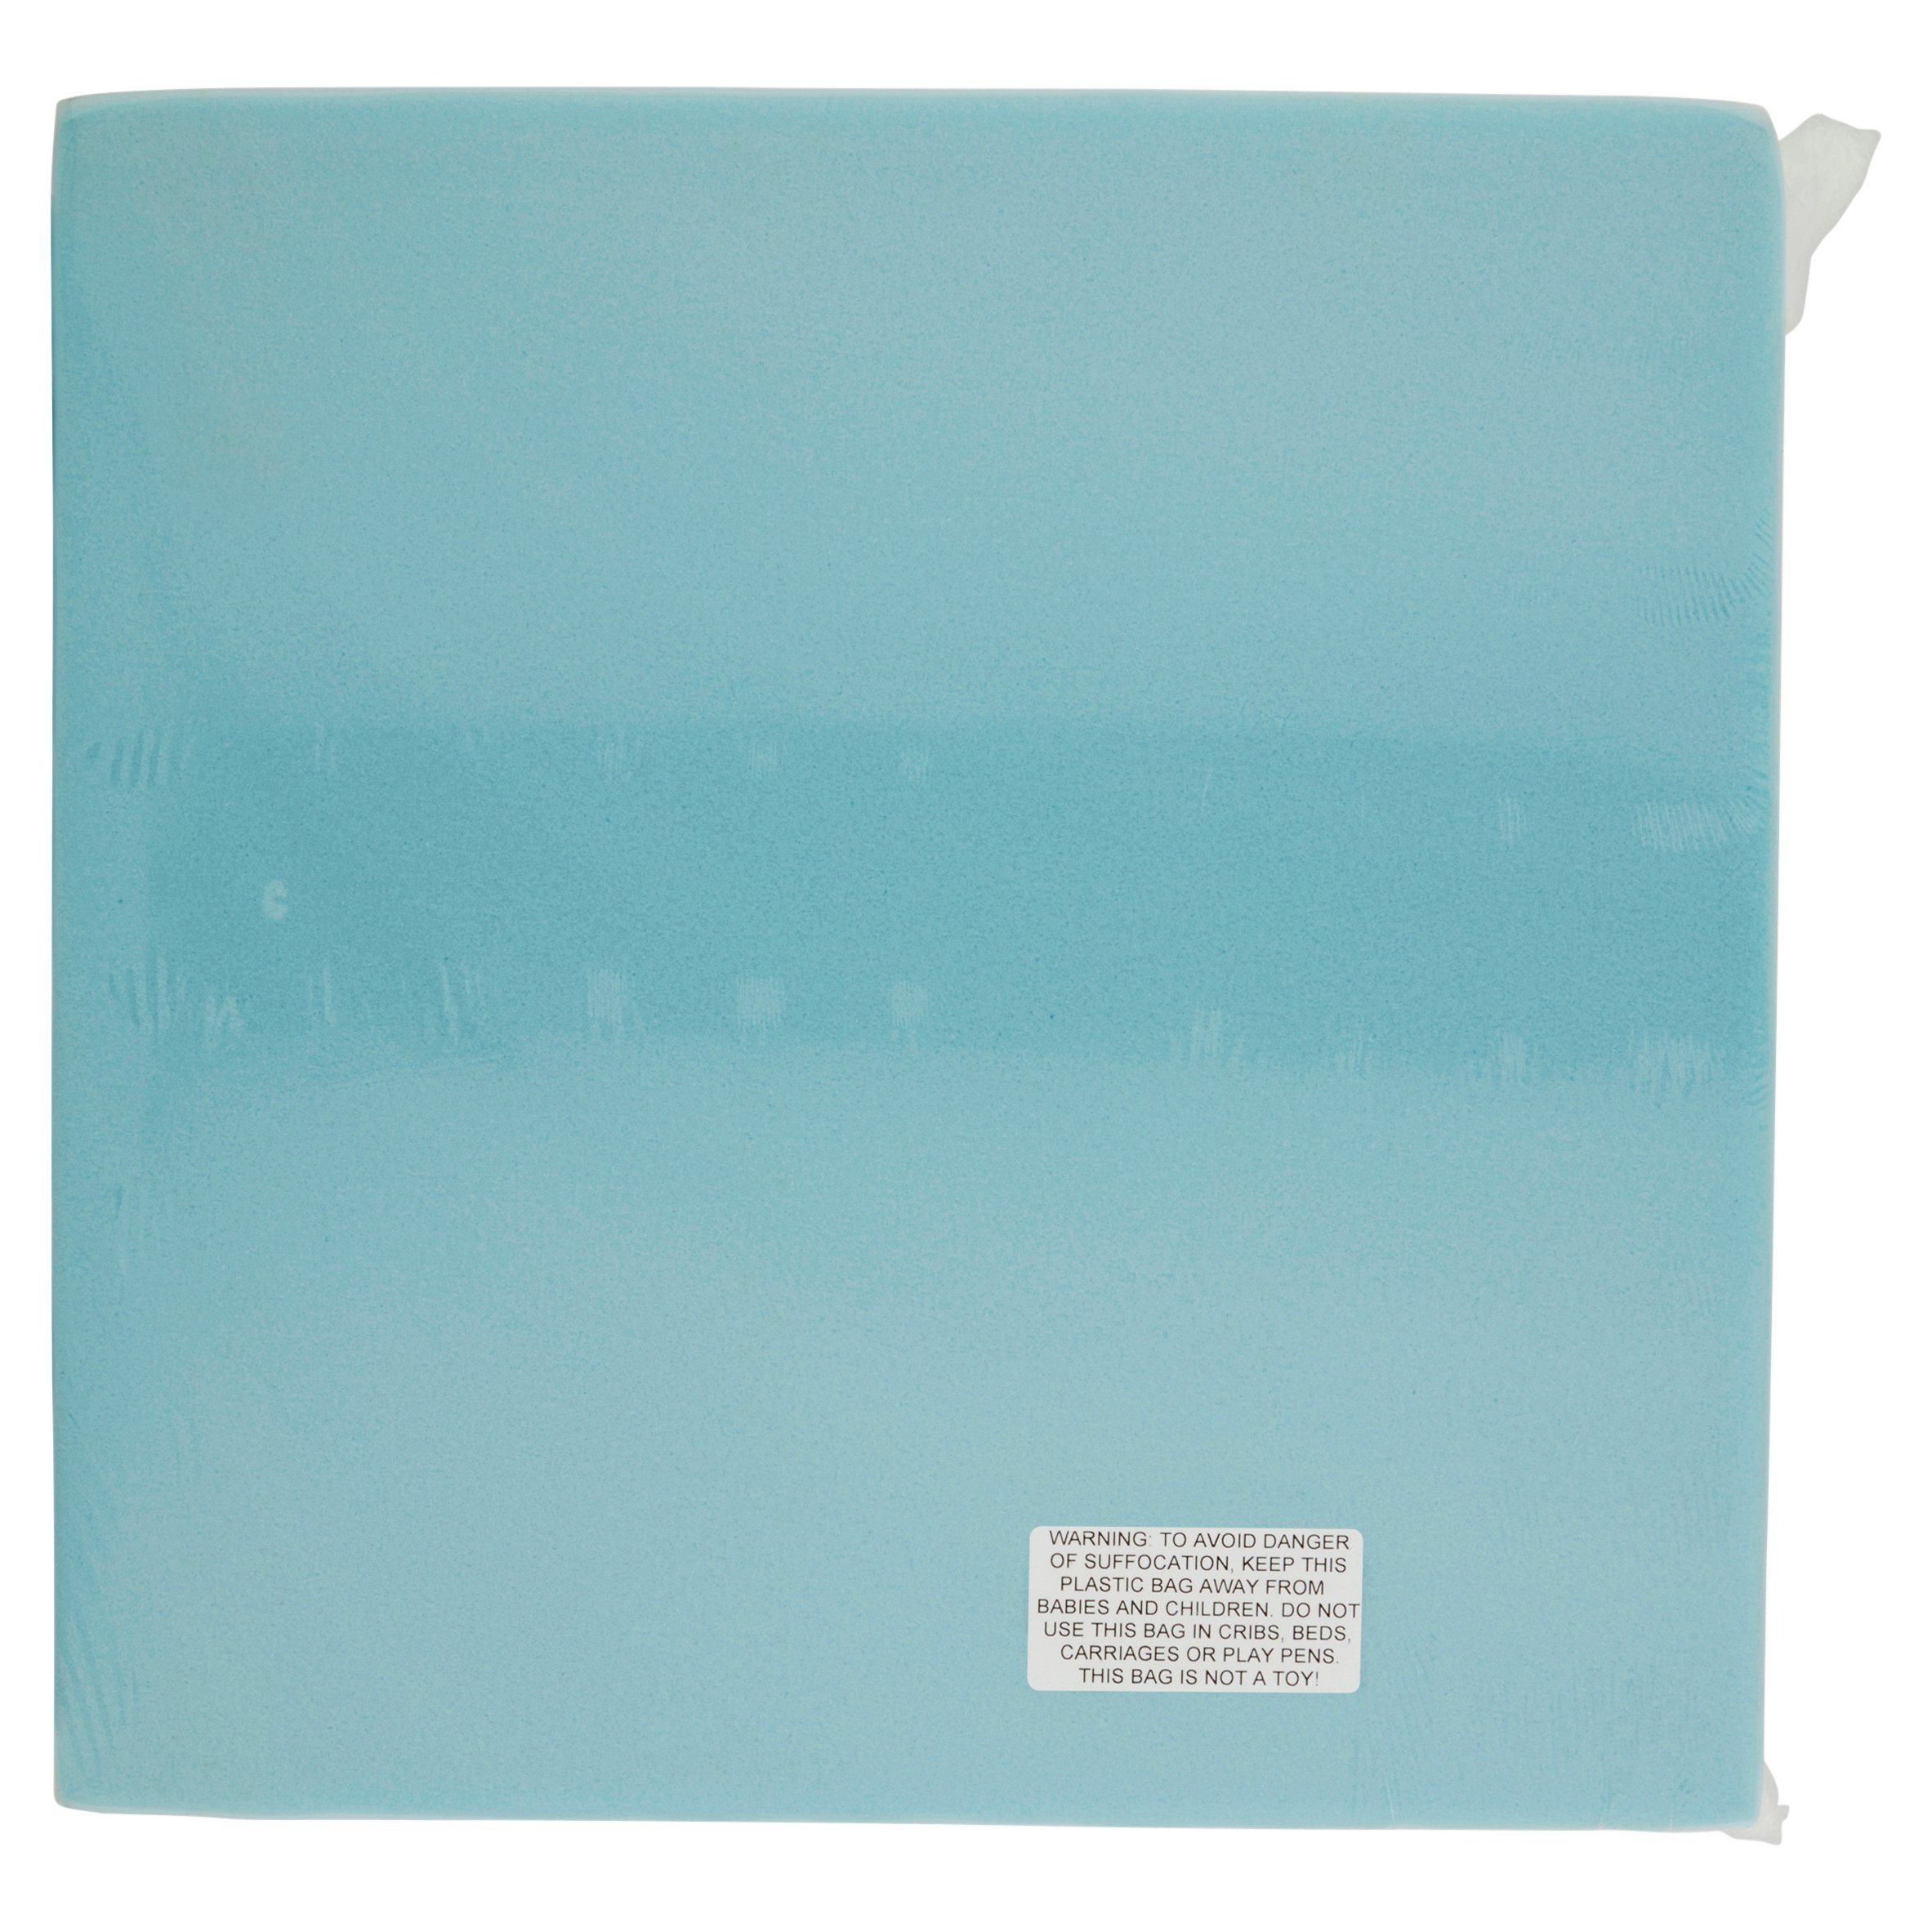 Morning Glory Premium High Density Craft and Cushion Foam, 22" x 22" Square x 4" Thick, 1 Each. Blue - image 2 of 5